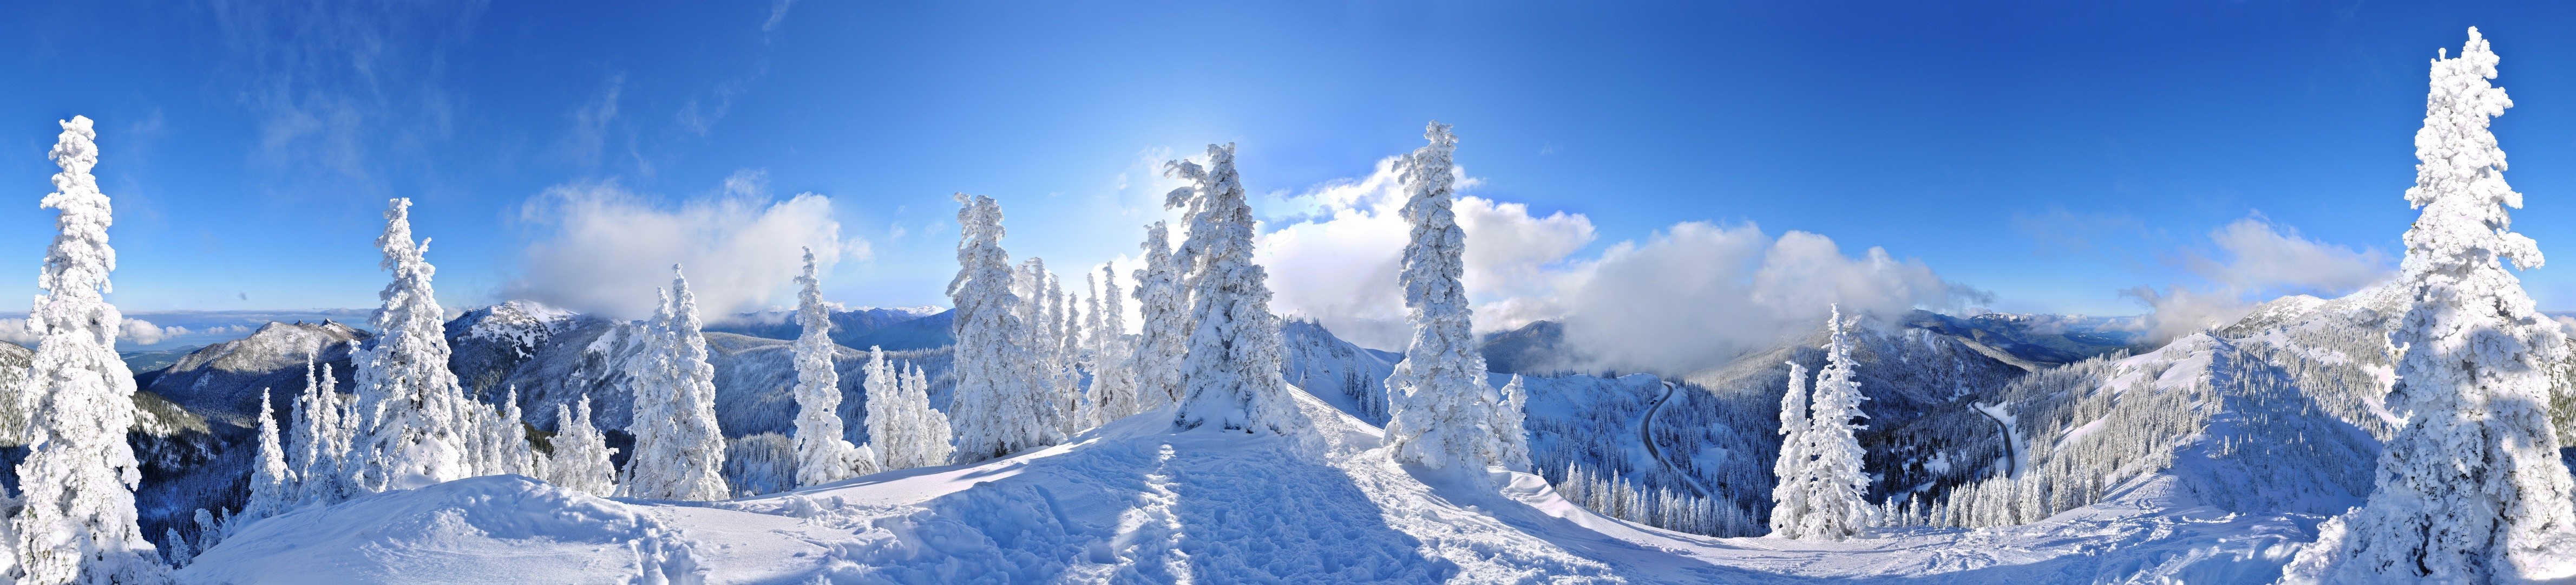 panoramas, Winter, Forest, Snow, Mountain, Trees, Road, Clouds, Nature, Landscape, White Wallpaper